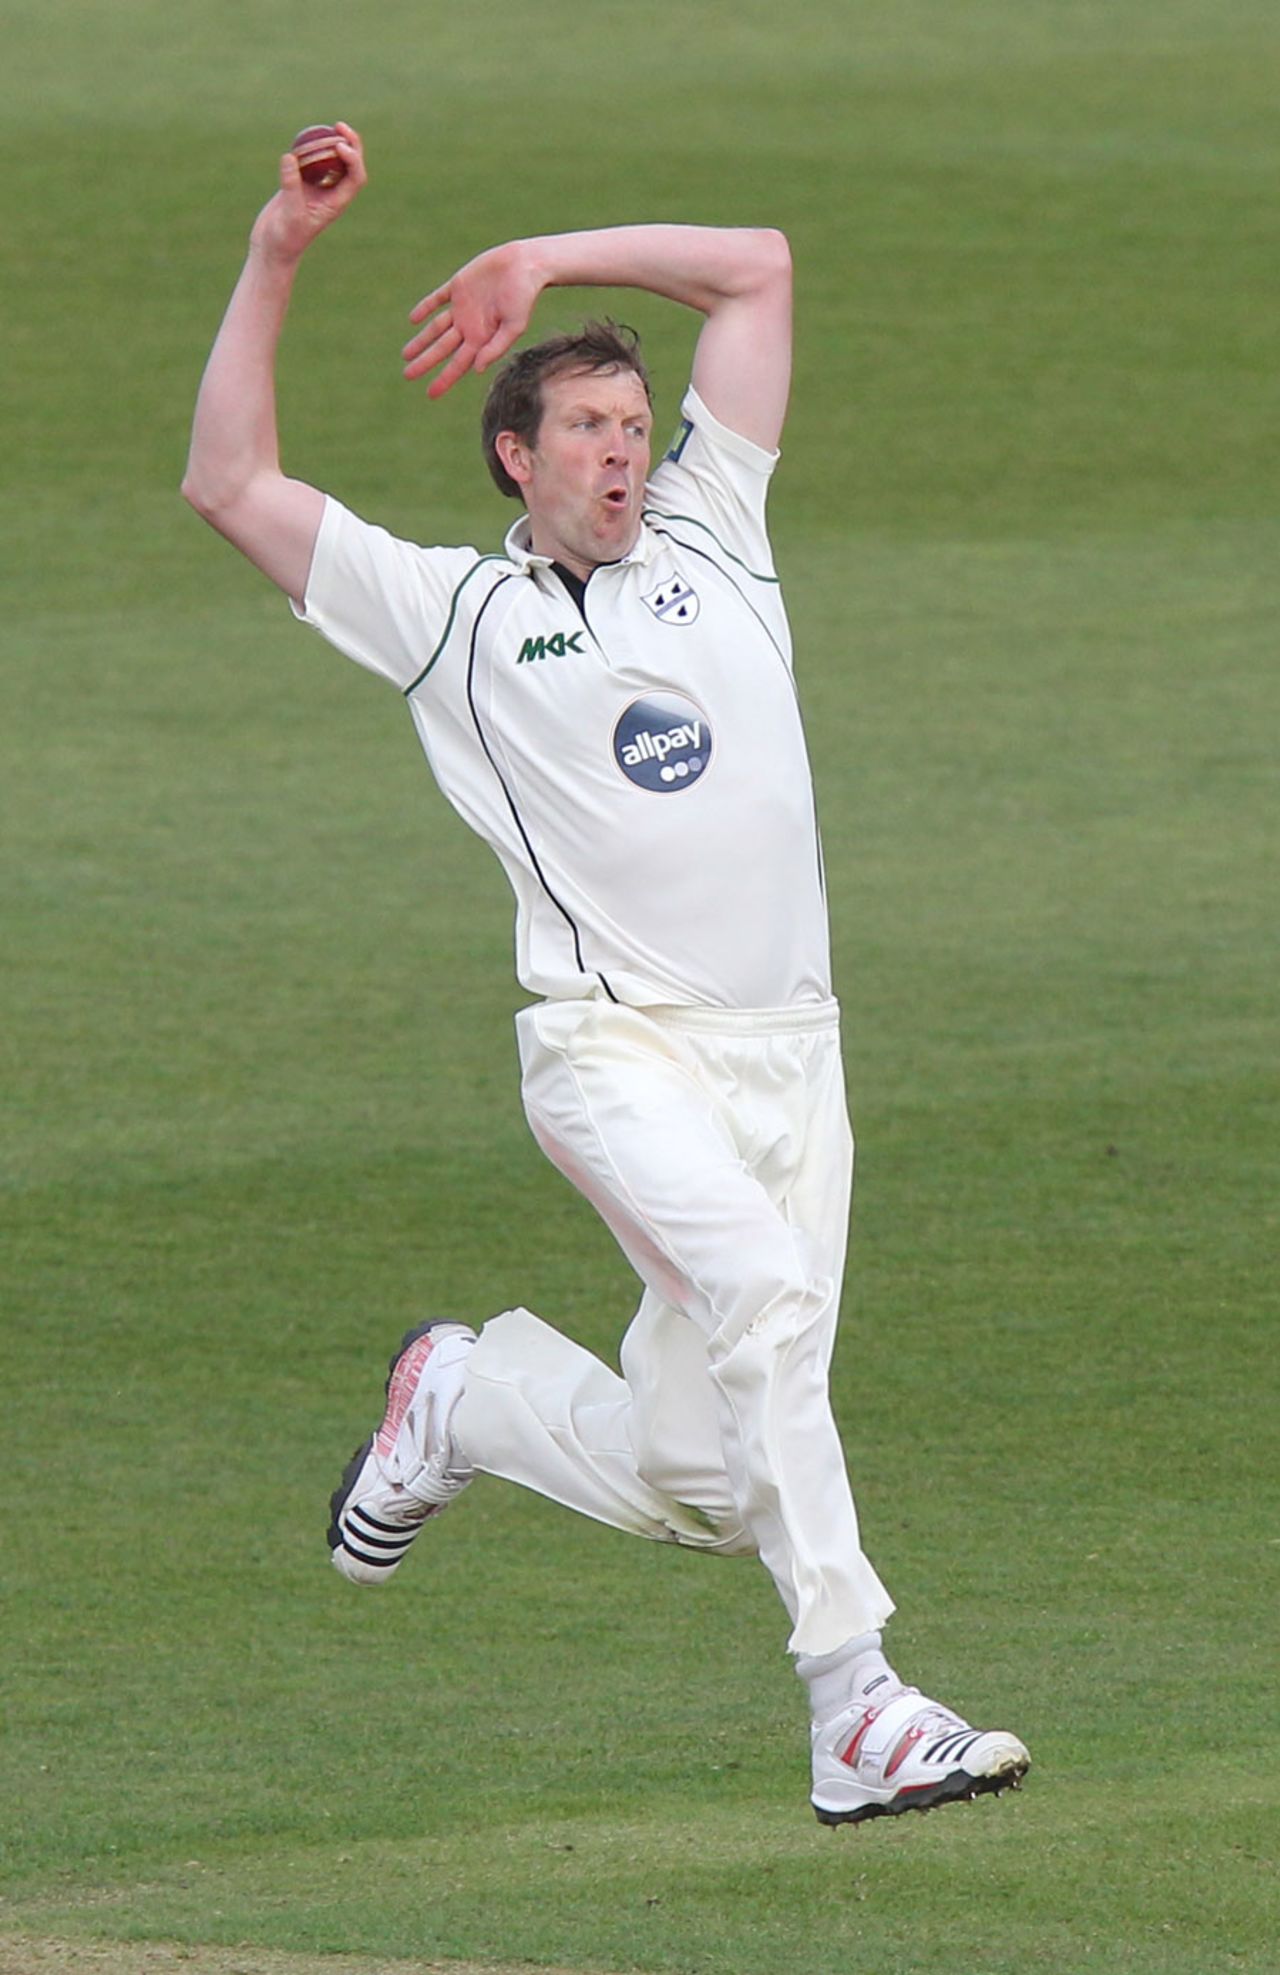 Alan Richardson picked up a wicket towards the end of the day, Hampshire v Worcestershire, County Championship, Division Two, Ageas Bowl, 1st day, April 24, 2013